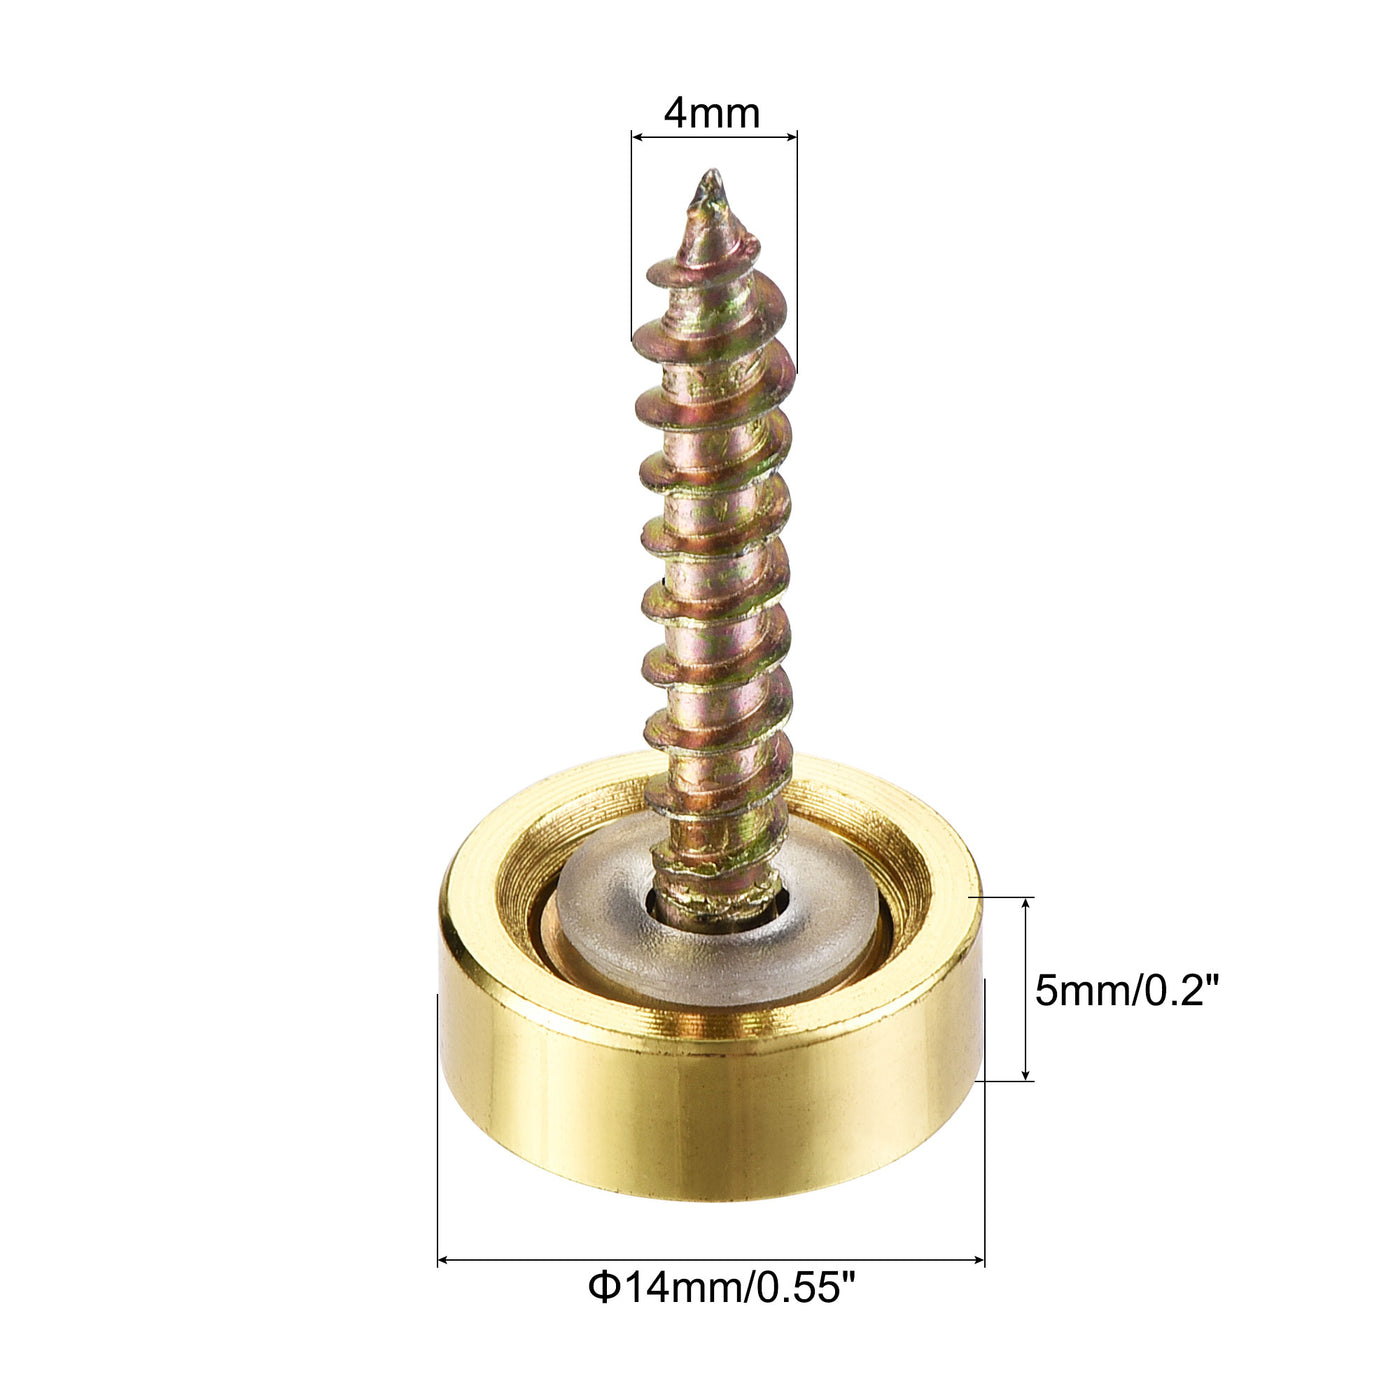 uxcell Uxcell Mirror Screws, 14mm/0.55", 20pcs Decorative Cap Fasteners Cover Nails, Electroplating, Bright Gold Metal